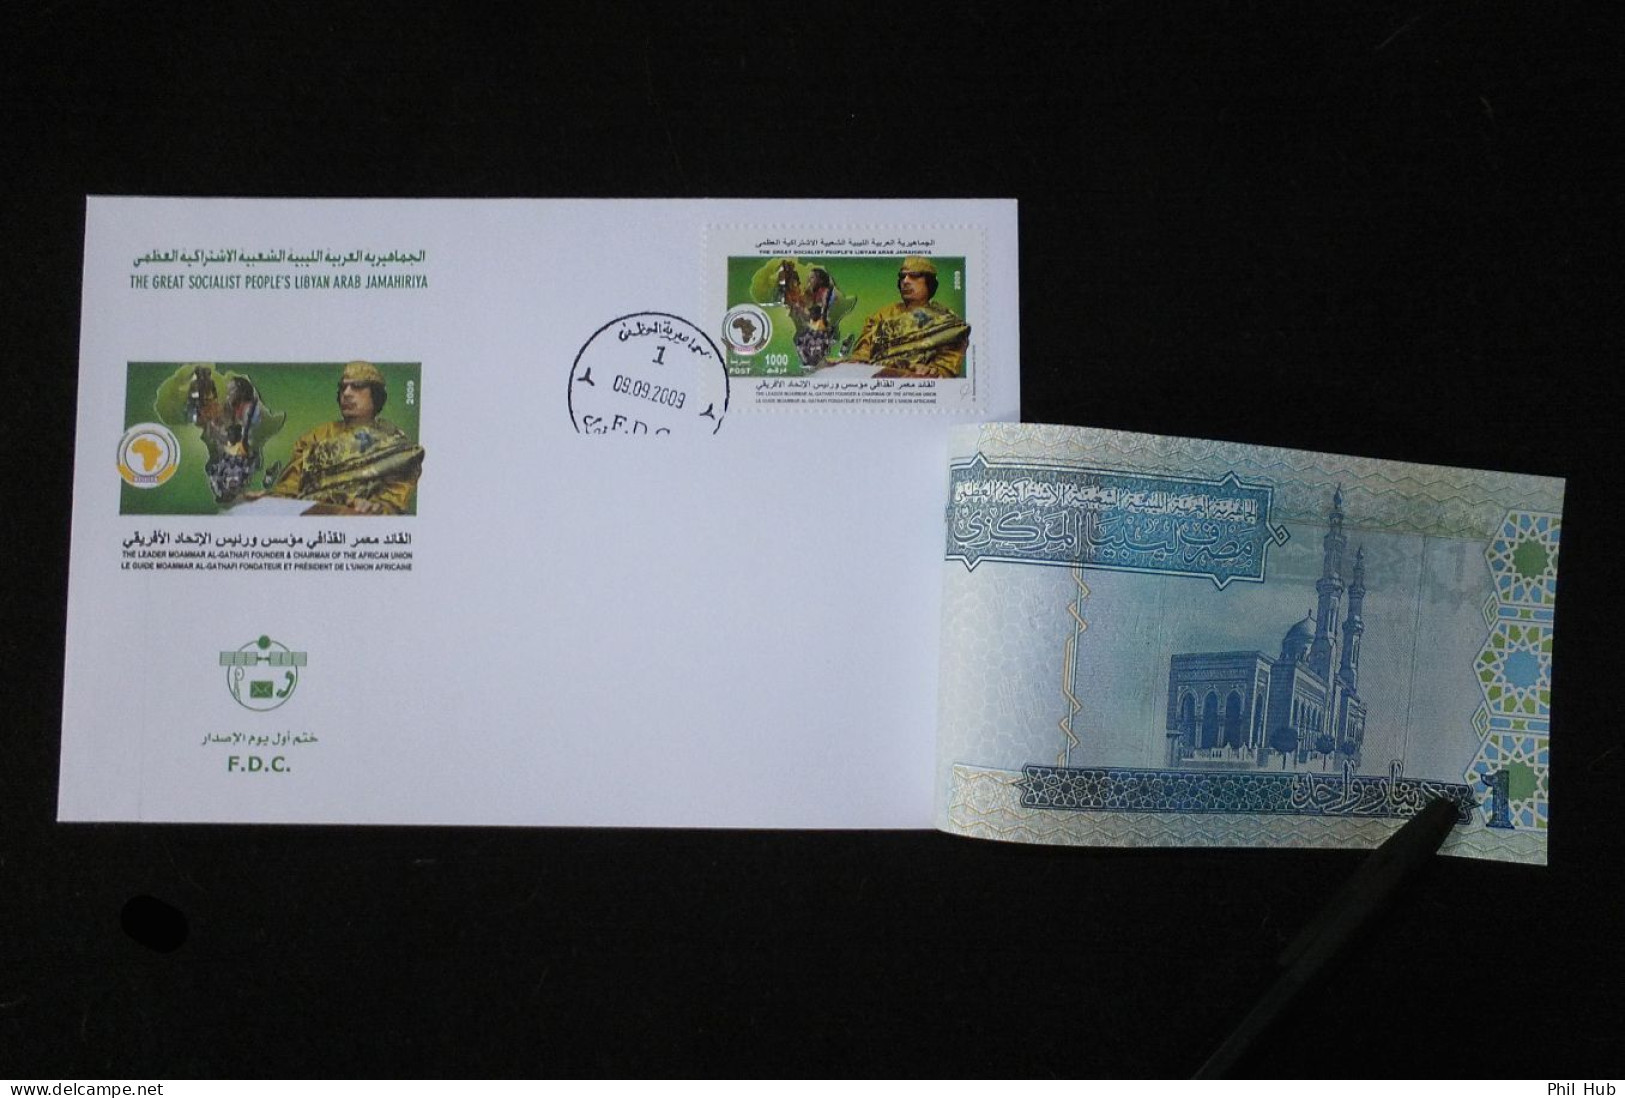 LIBYA 2009 "Gaddafi Africa Union Leader FDC" STAMP And BANKNOTE On FDC - Libye